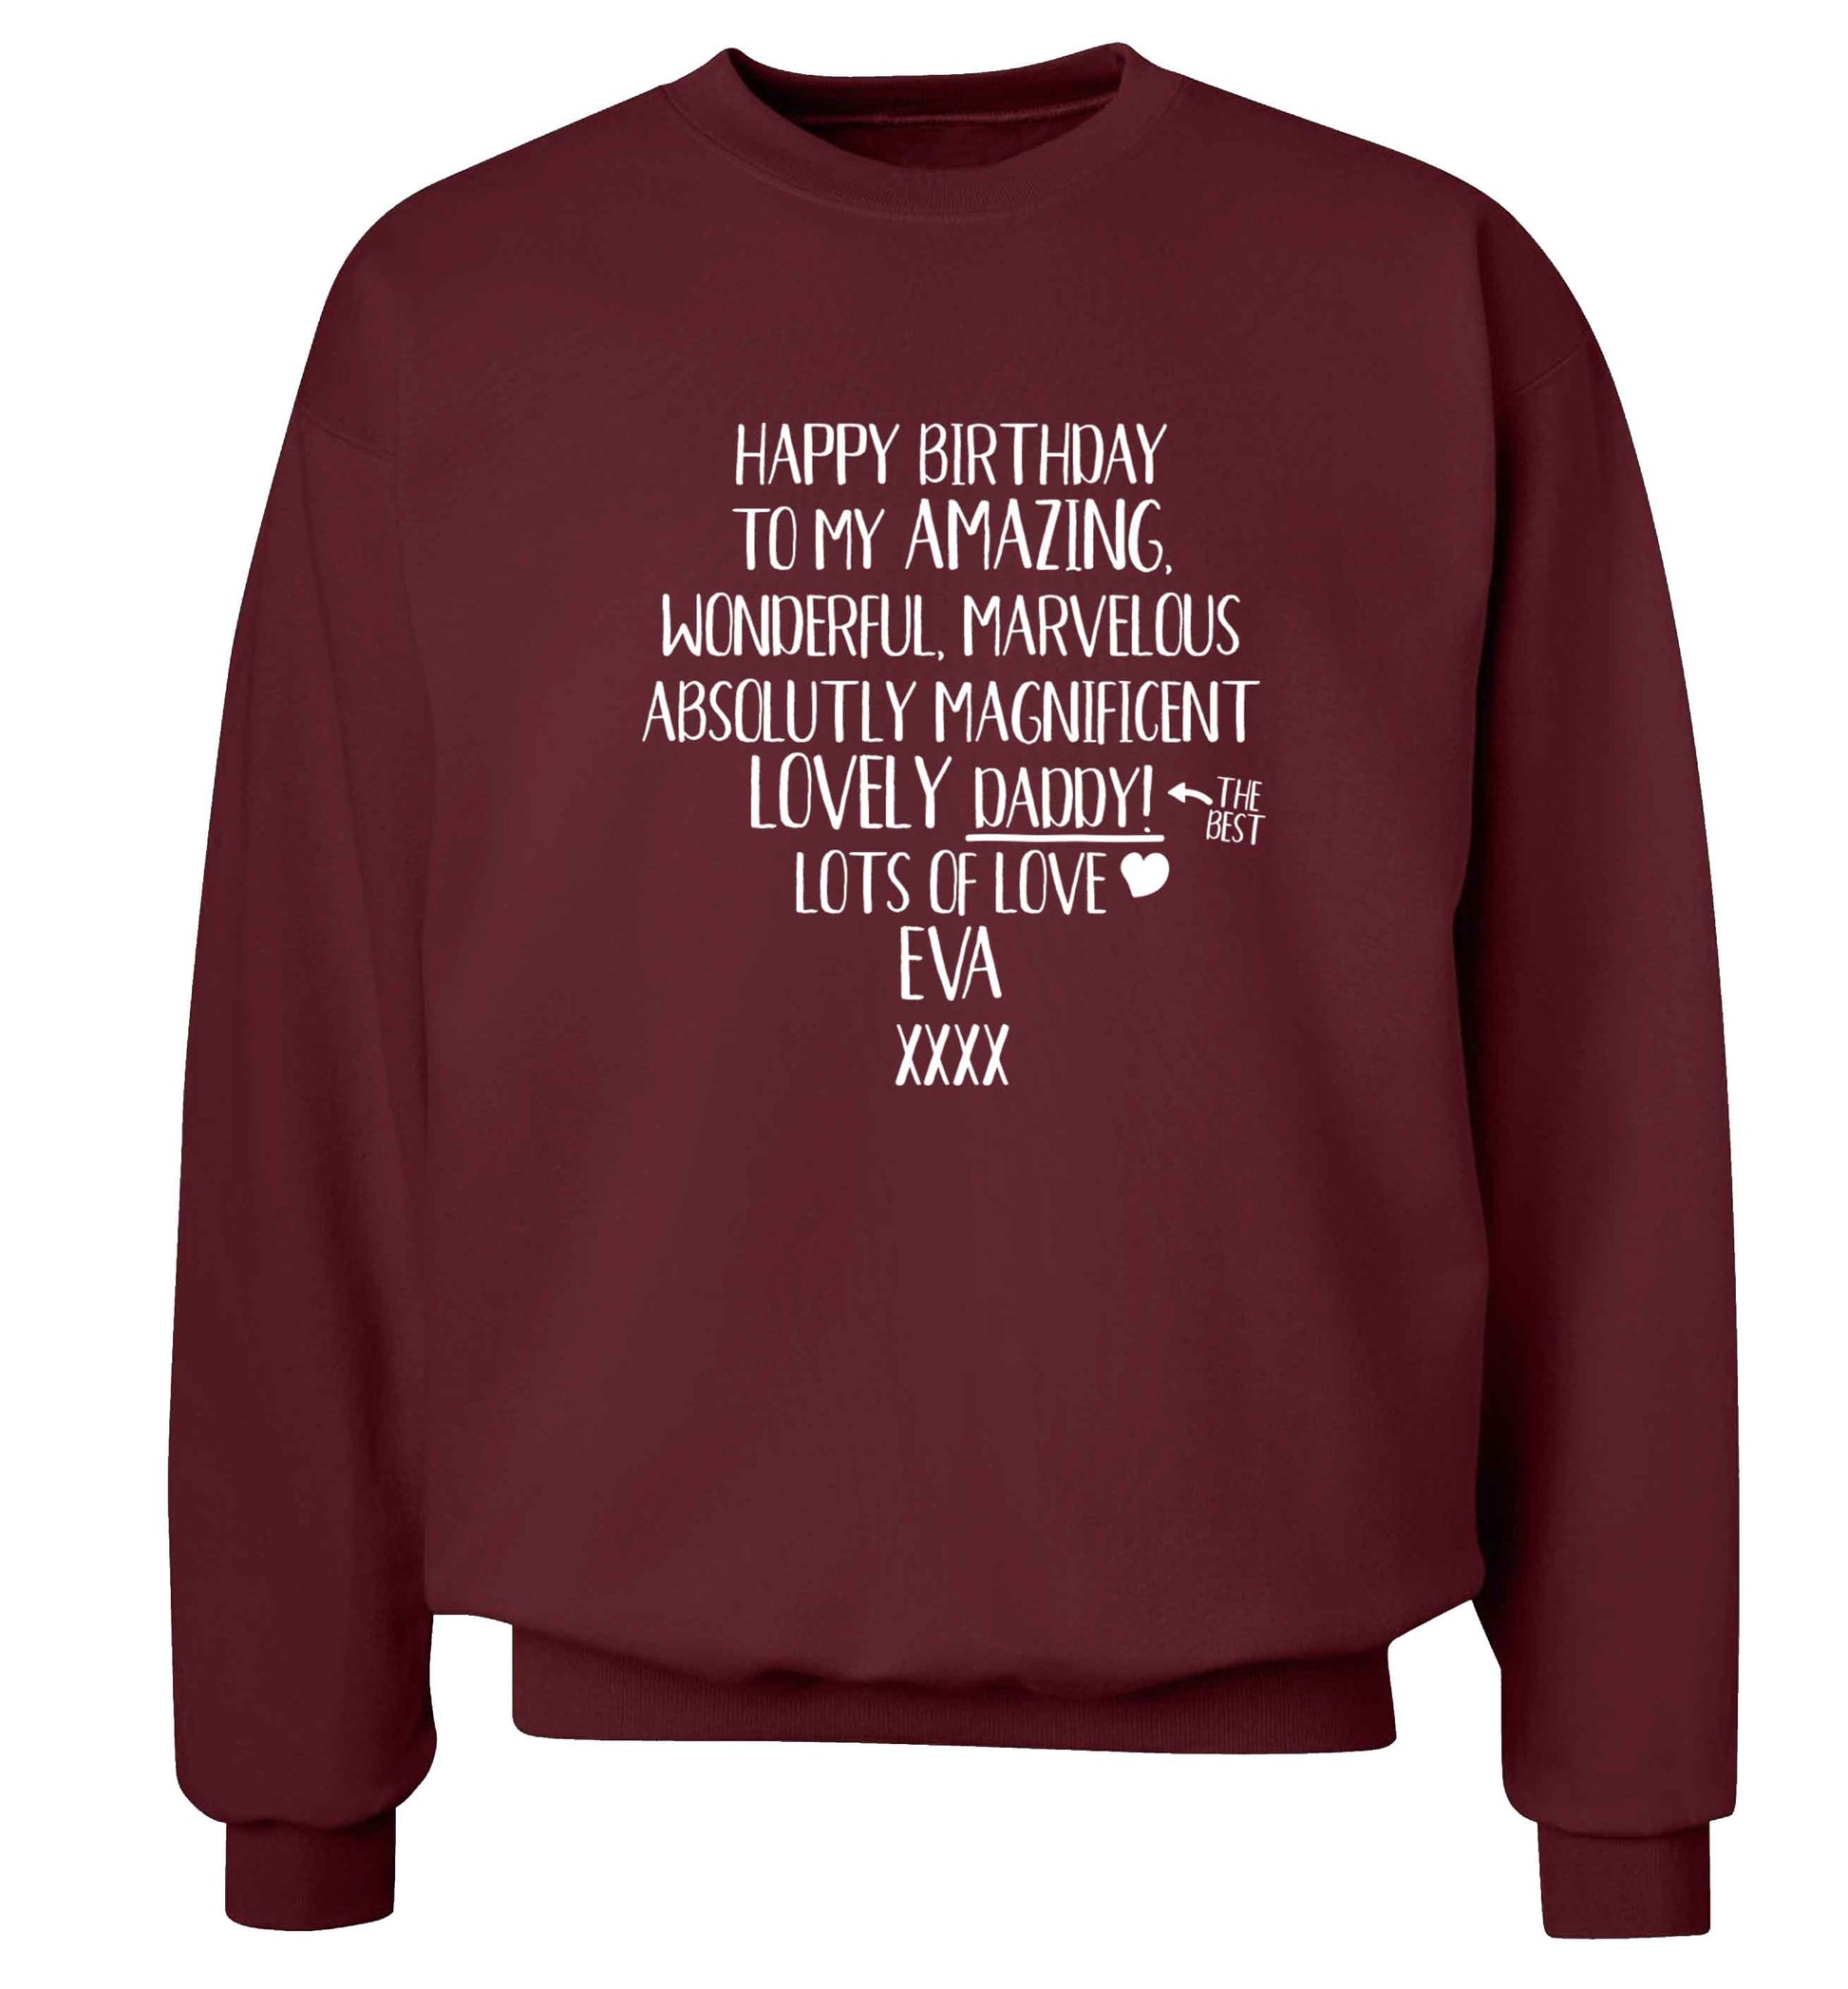 Personalised happy birthday to my amazing, wonderful, lovely daddy Adult's unisex maroon Sweater 2XL